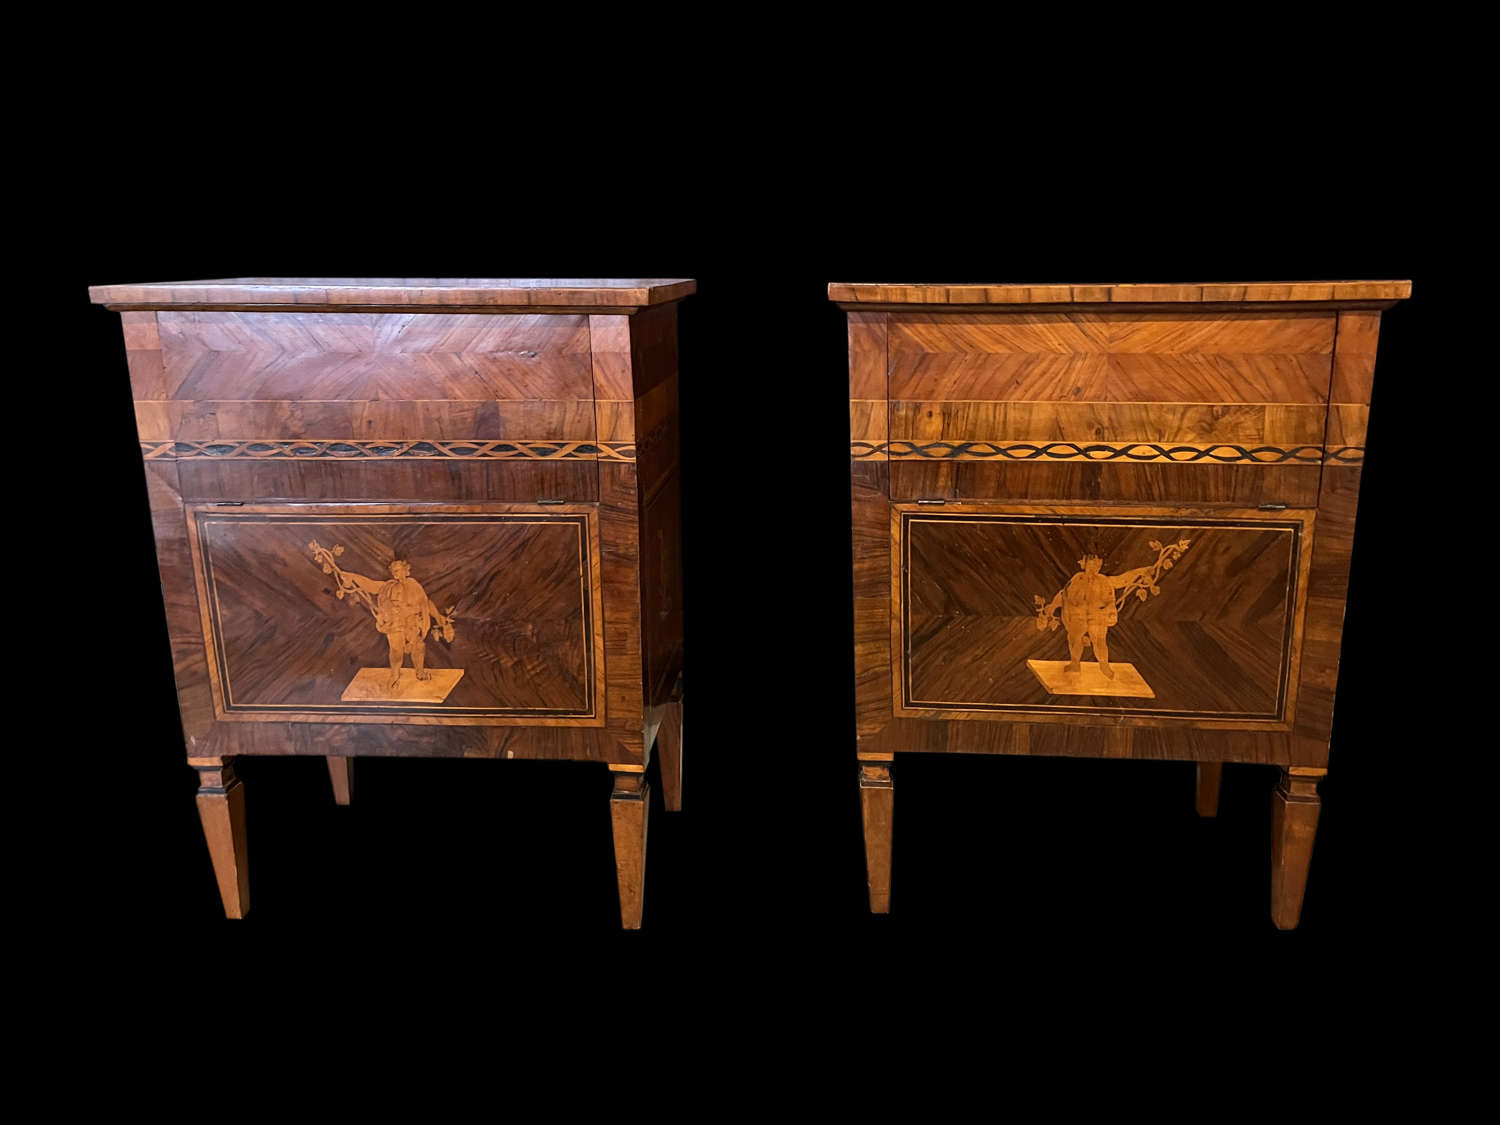 A RARE PAIR OF MARQUETRY COMMODINI ITALY C 1790